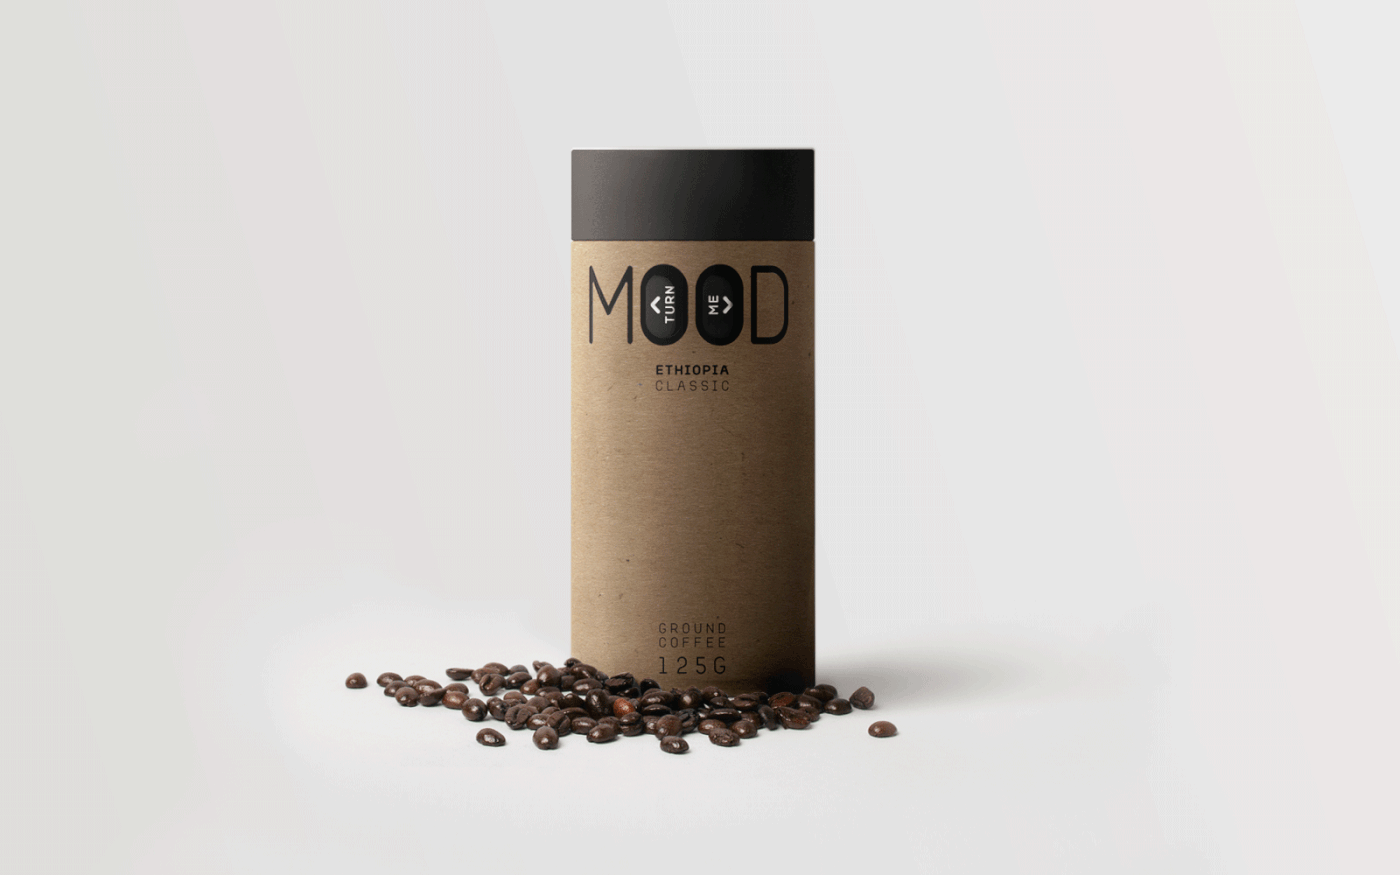 MOOD Coffee Packaging Design Concept